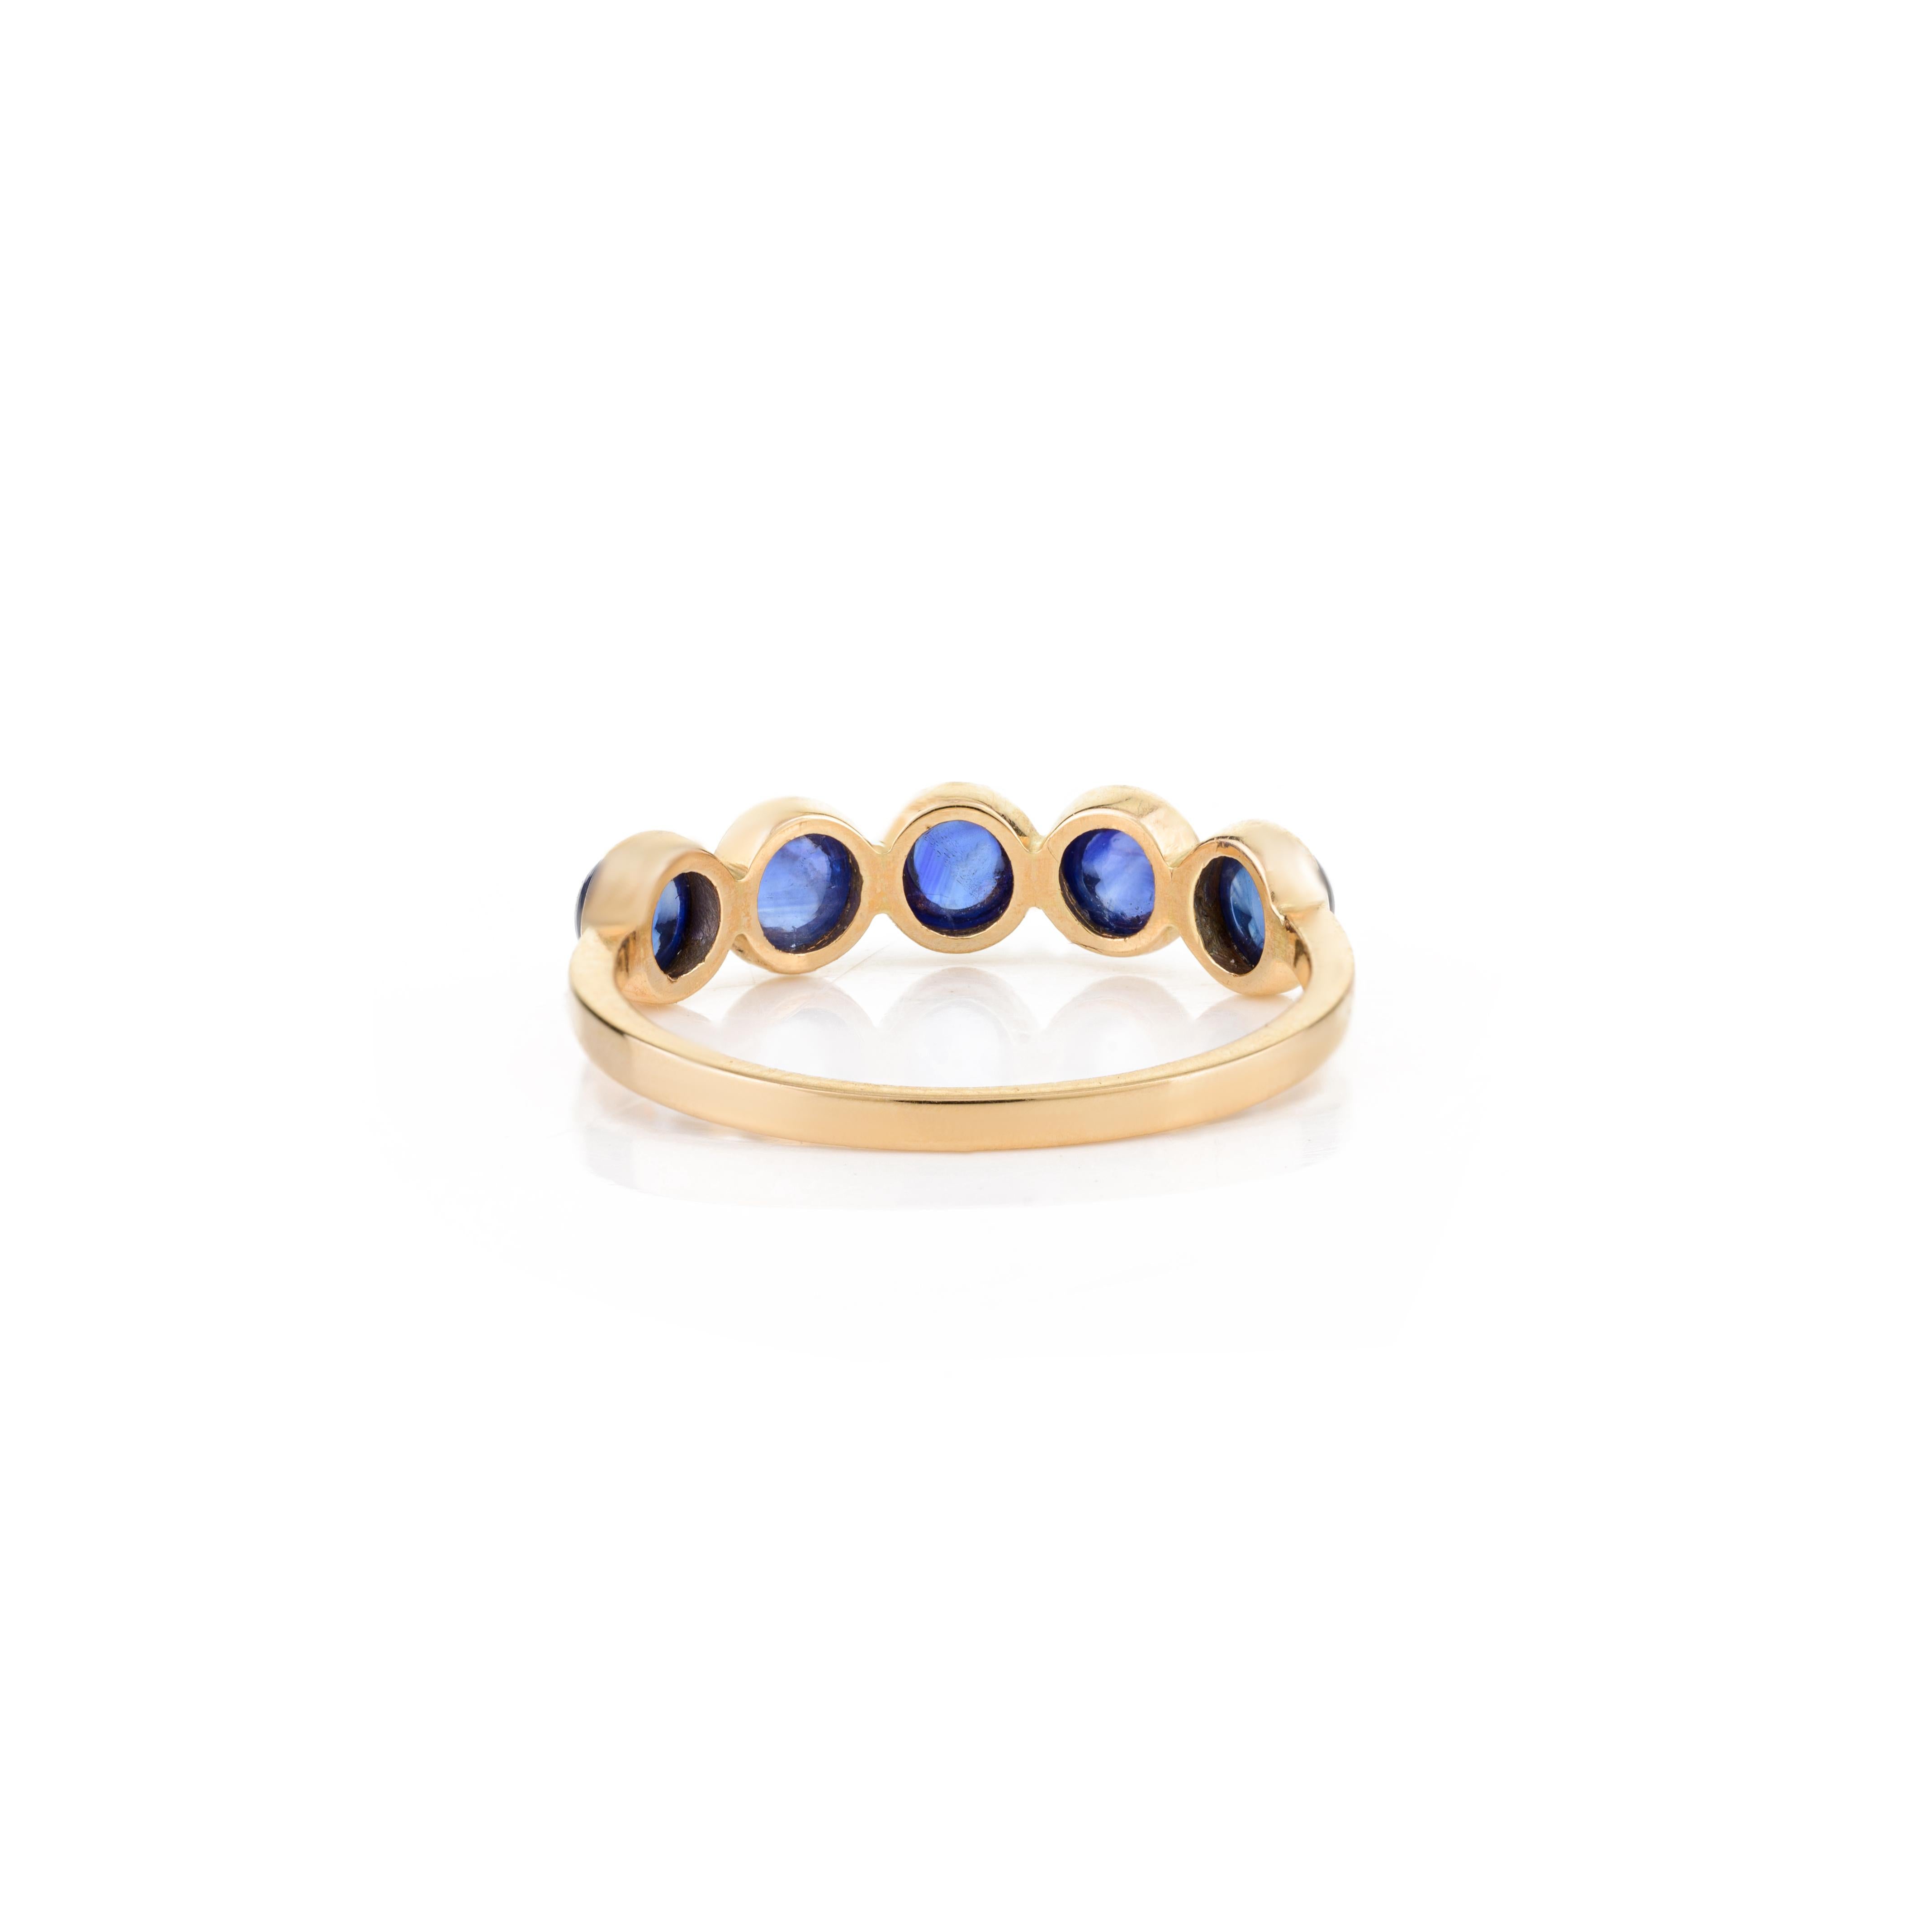 For Sale:  Blue Sapphire Bezel Set Band Stacking Ring in 14k Solid Yellow Gold Gift for Her 5